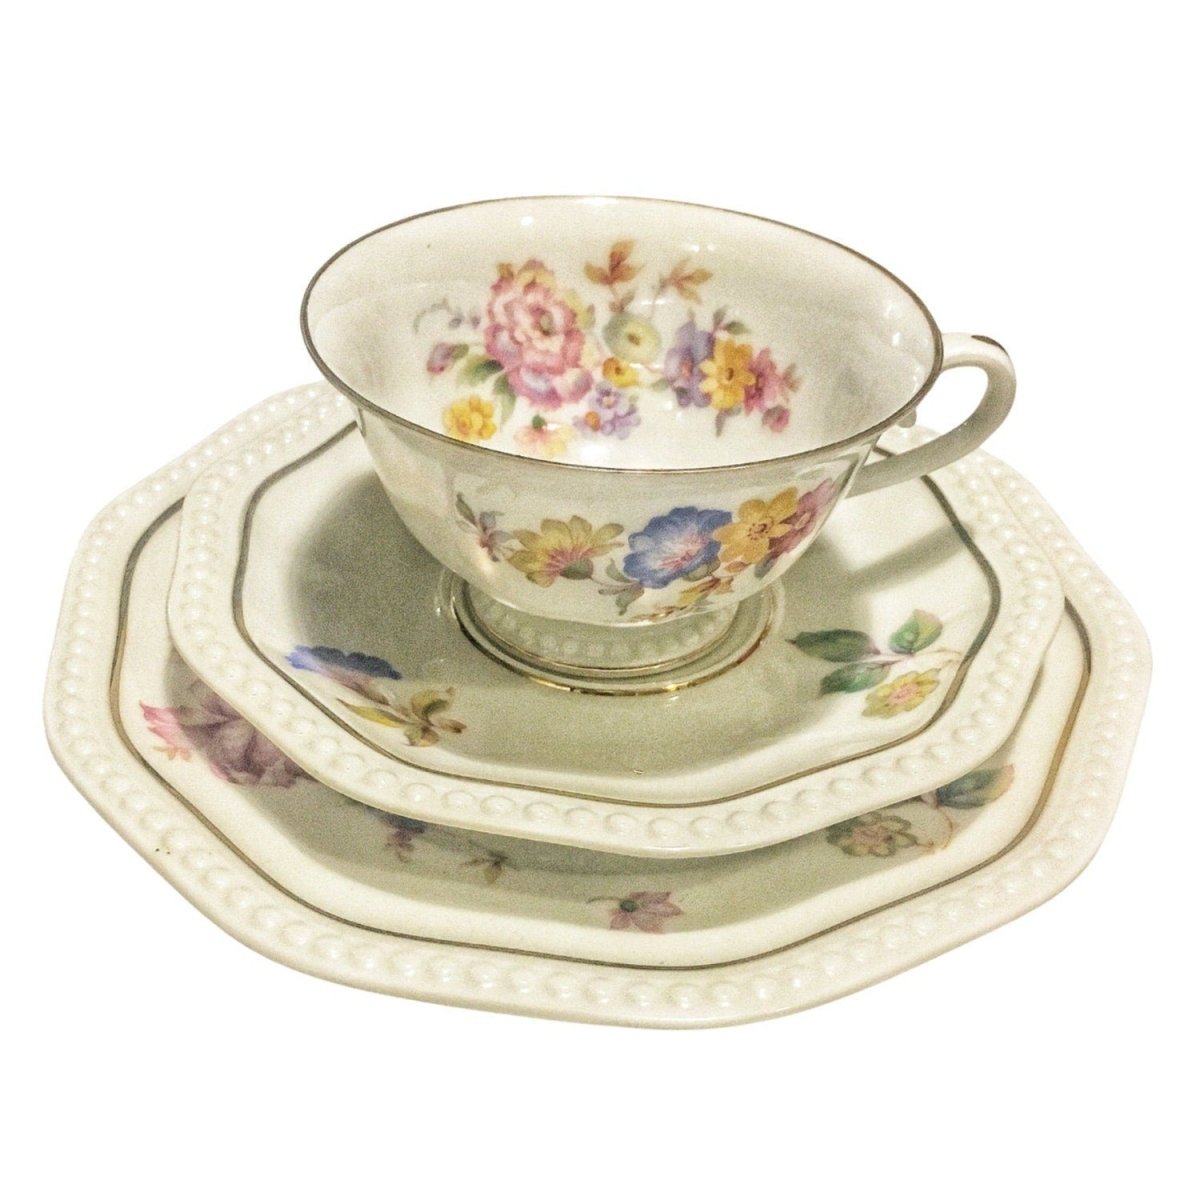 Rosenthal | Antique 1921 | demitasse tea trio, cup saucer & plate with floral detail - Chinamania.shop